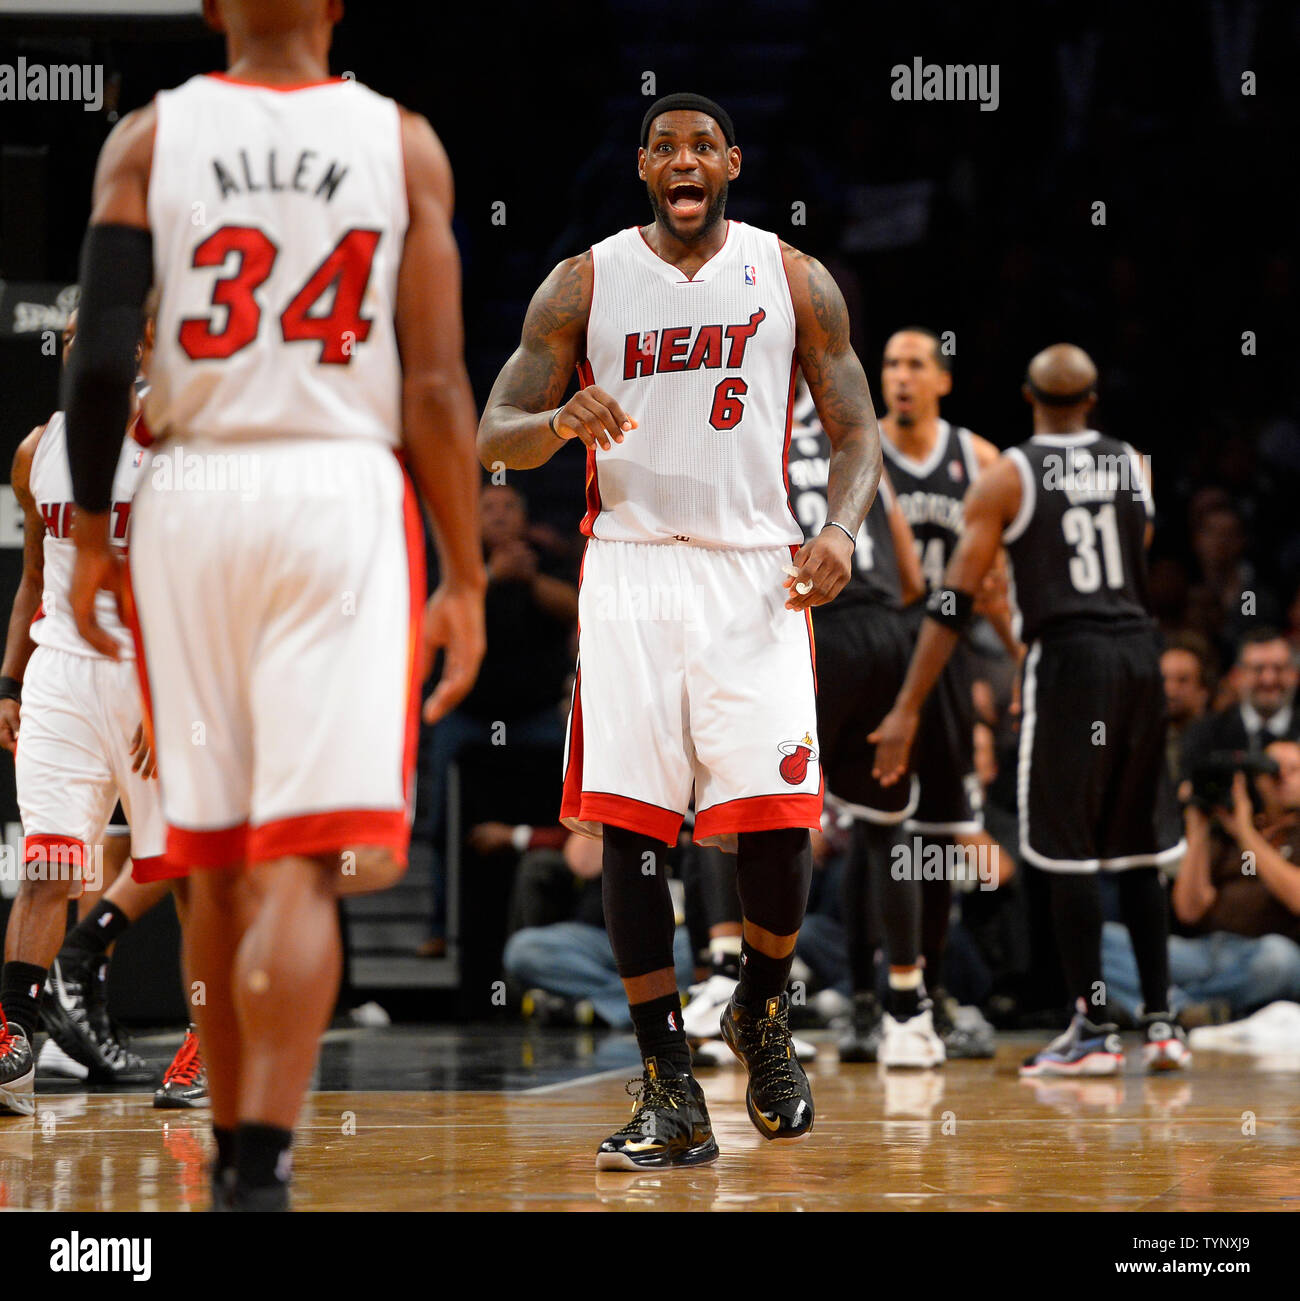 Miami Heat small forward LeBron James (6) looks back at Heat shooting guard Ray Allen (34) in the fourth quarter against the Brooklyn Nets at Barclays Center in New York City on November 1, 2013.   UPI/Rich Kane Stock Photo